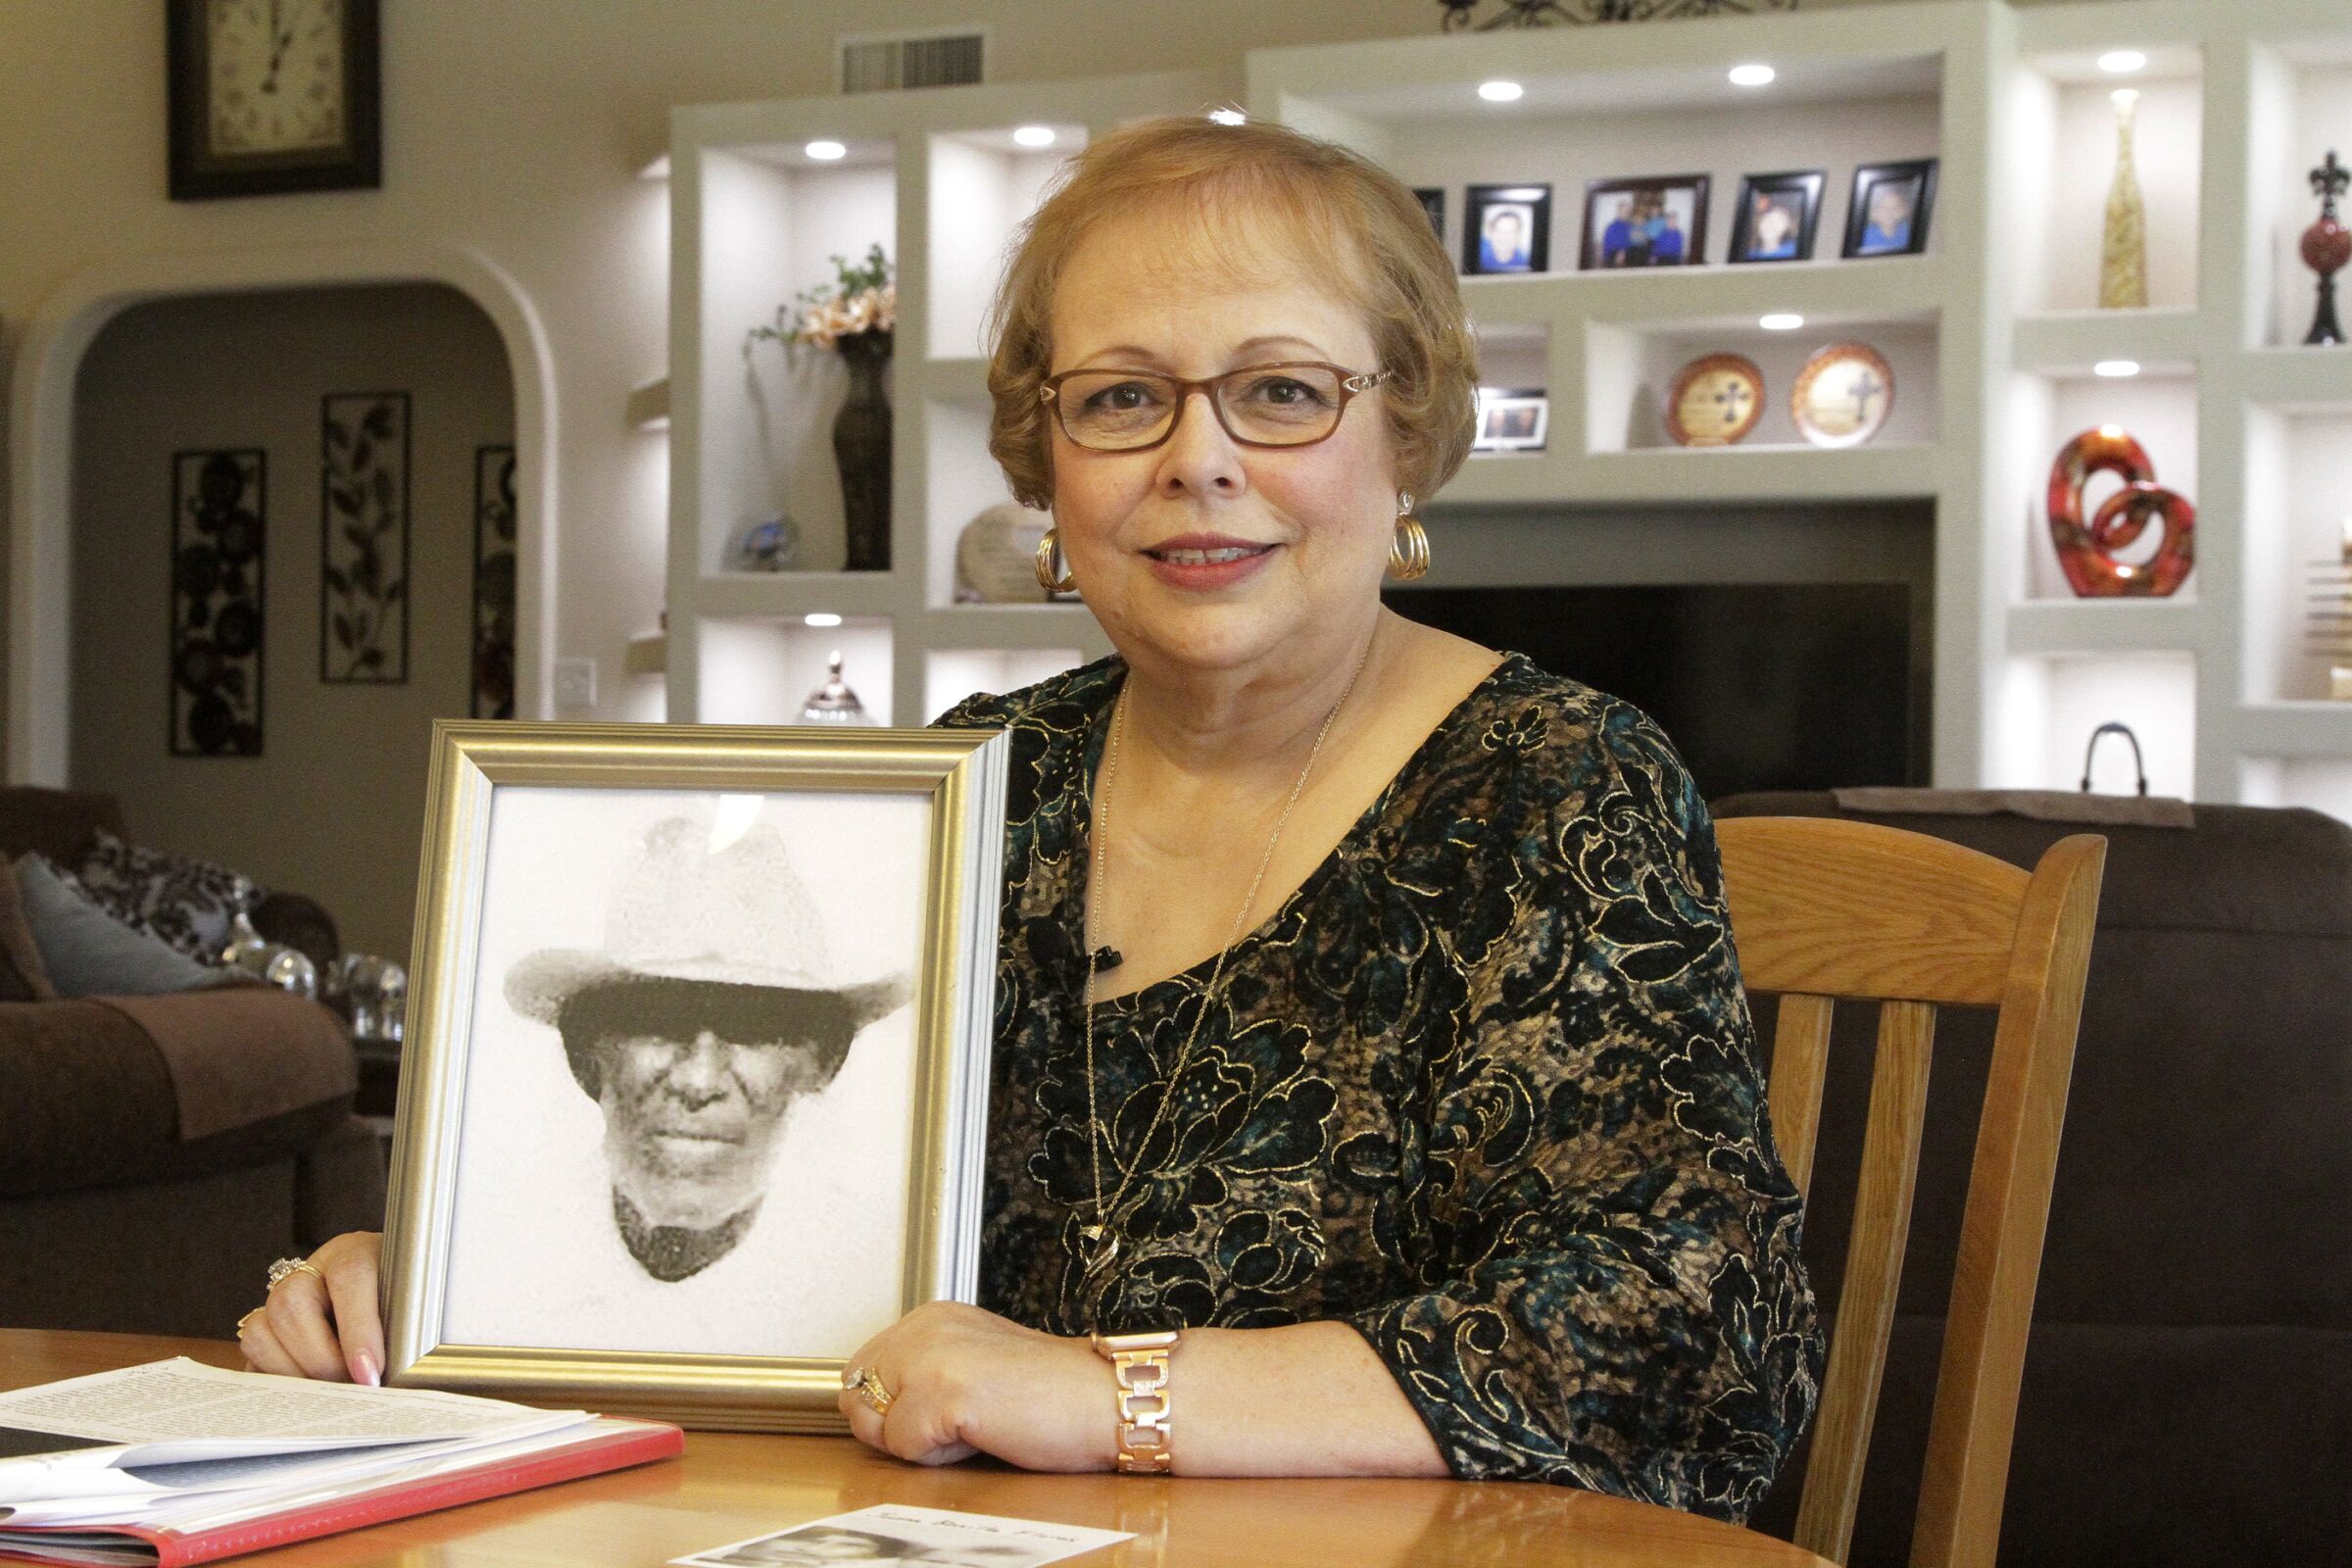 Arlinda Valencia with a portrait of her great-grandfather Longino Flores